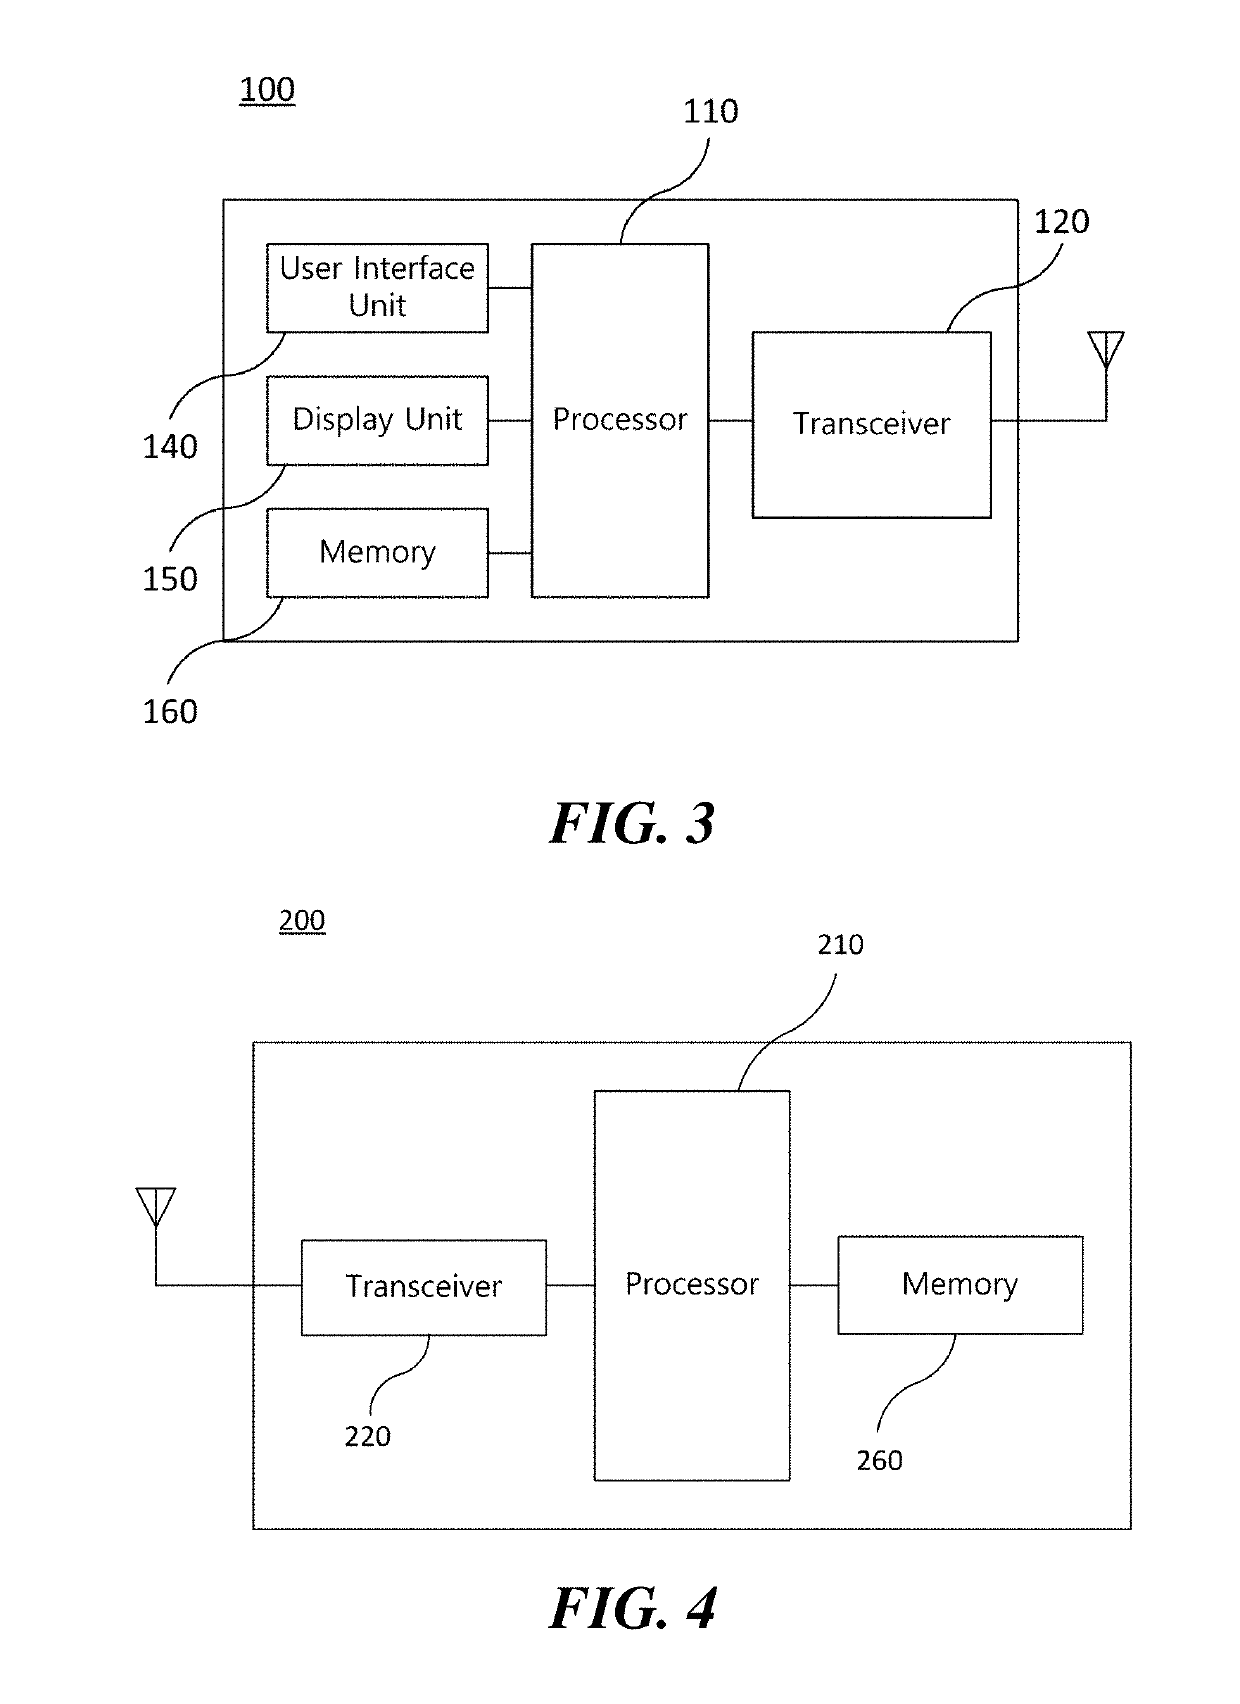 Wireless communication method using enhanced distributed channel access, and wireless communication terminal using same